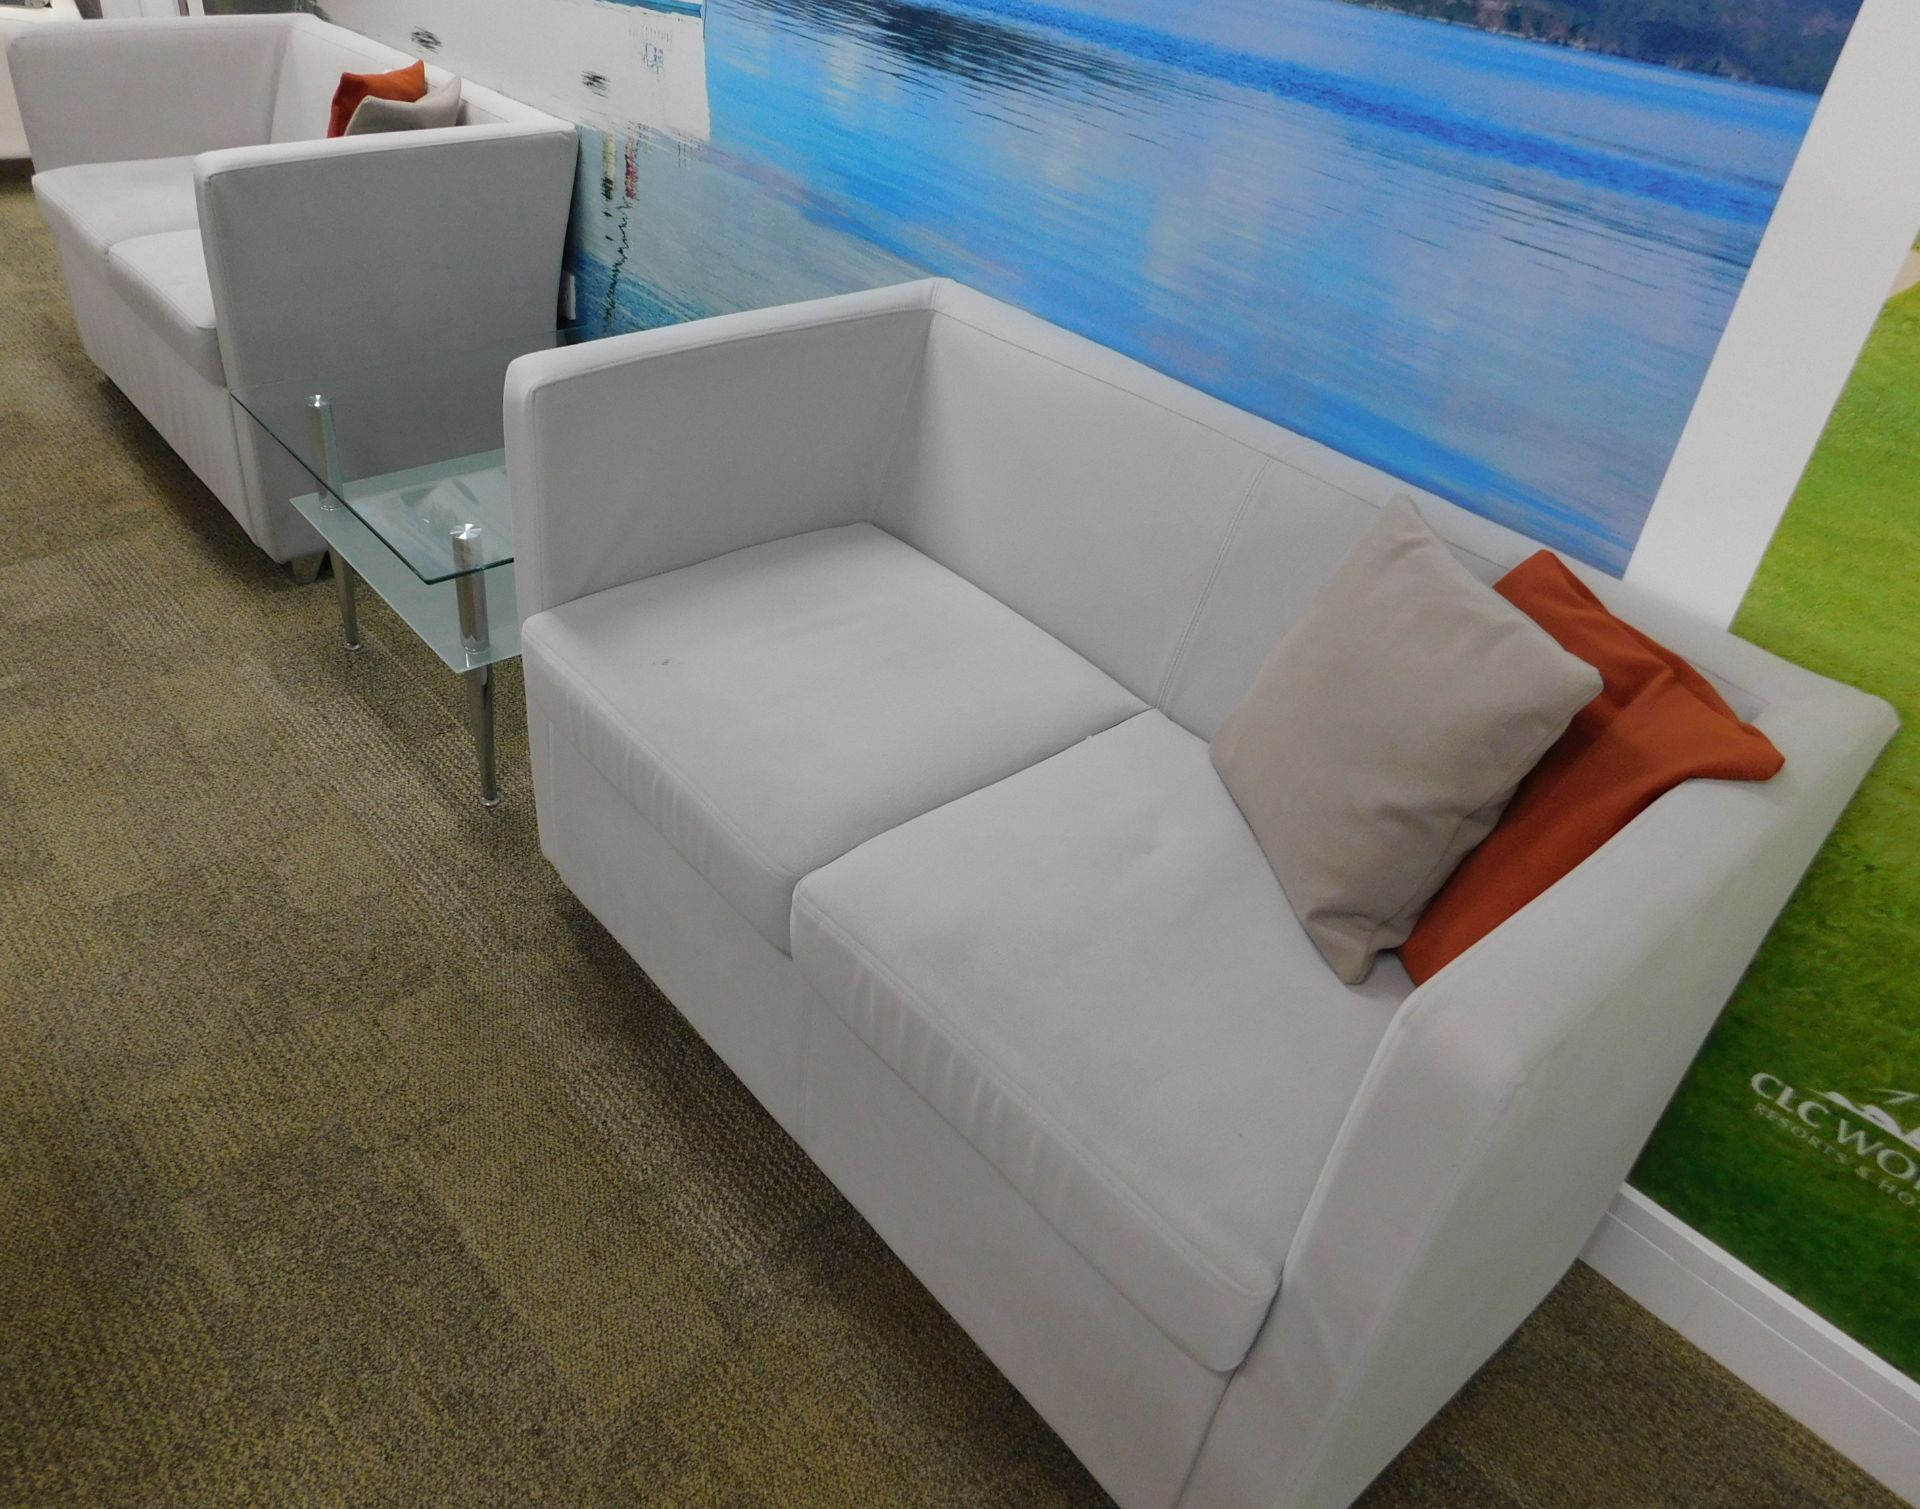 2 Jack Twin Seat Sofas, 120cm x 65cm, a Plate Glass Coffee Table & 4 Scatter Cushions (Located - Image 2 of 2